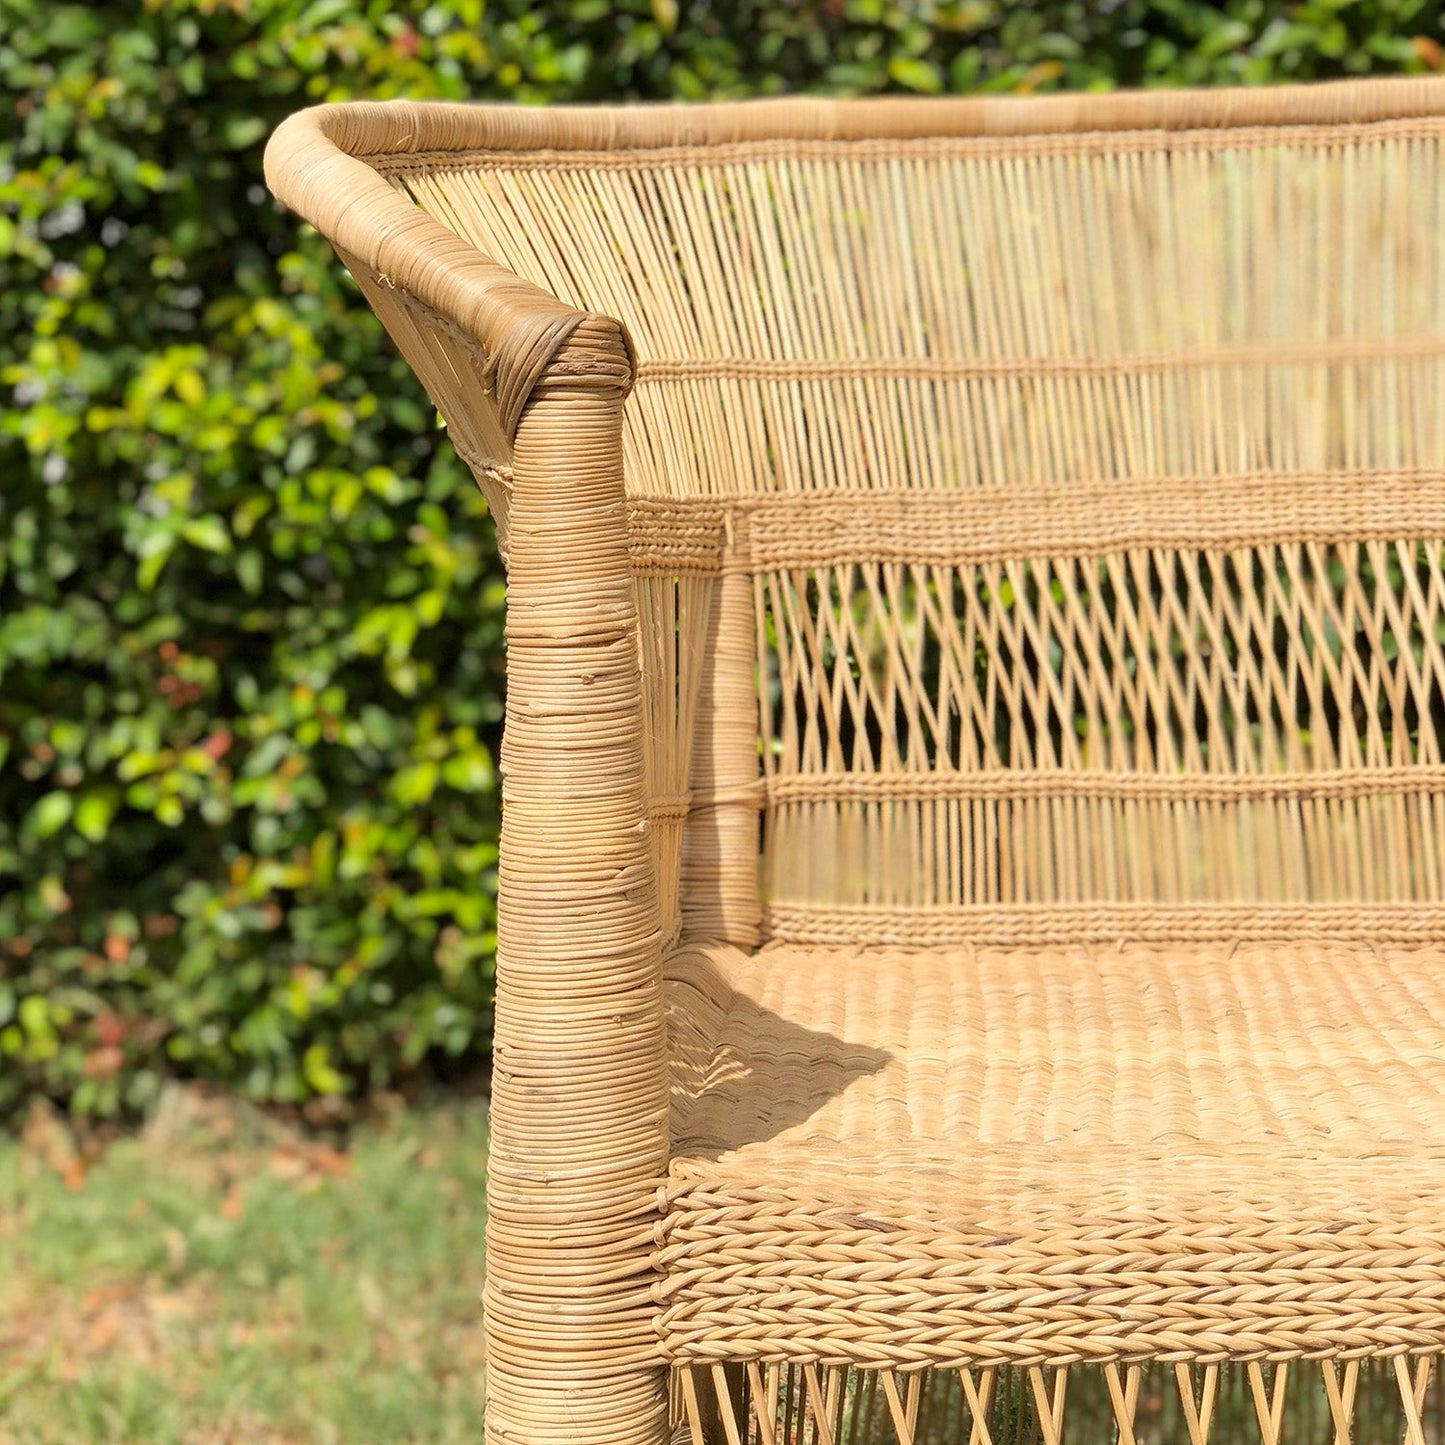 2 x Traditional Malawi Cane Chairs